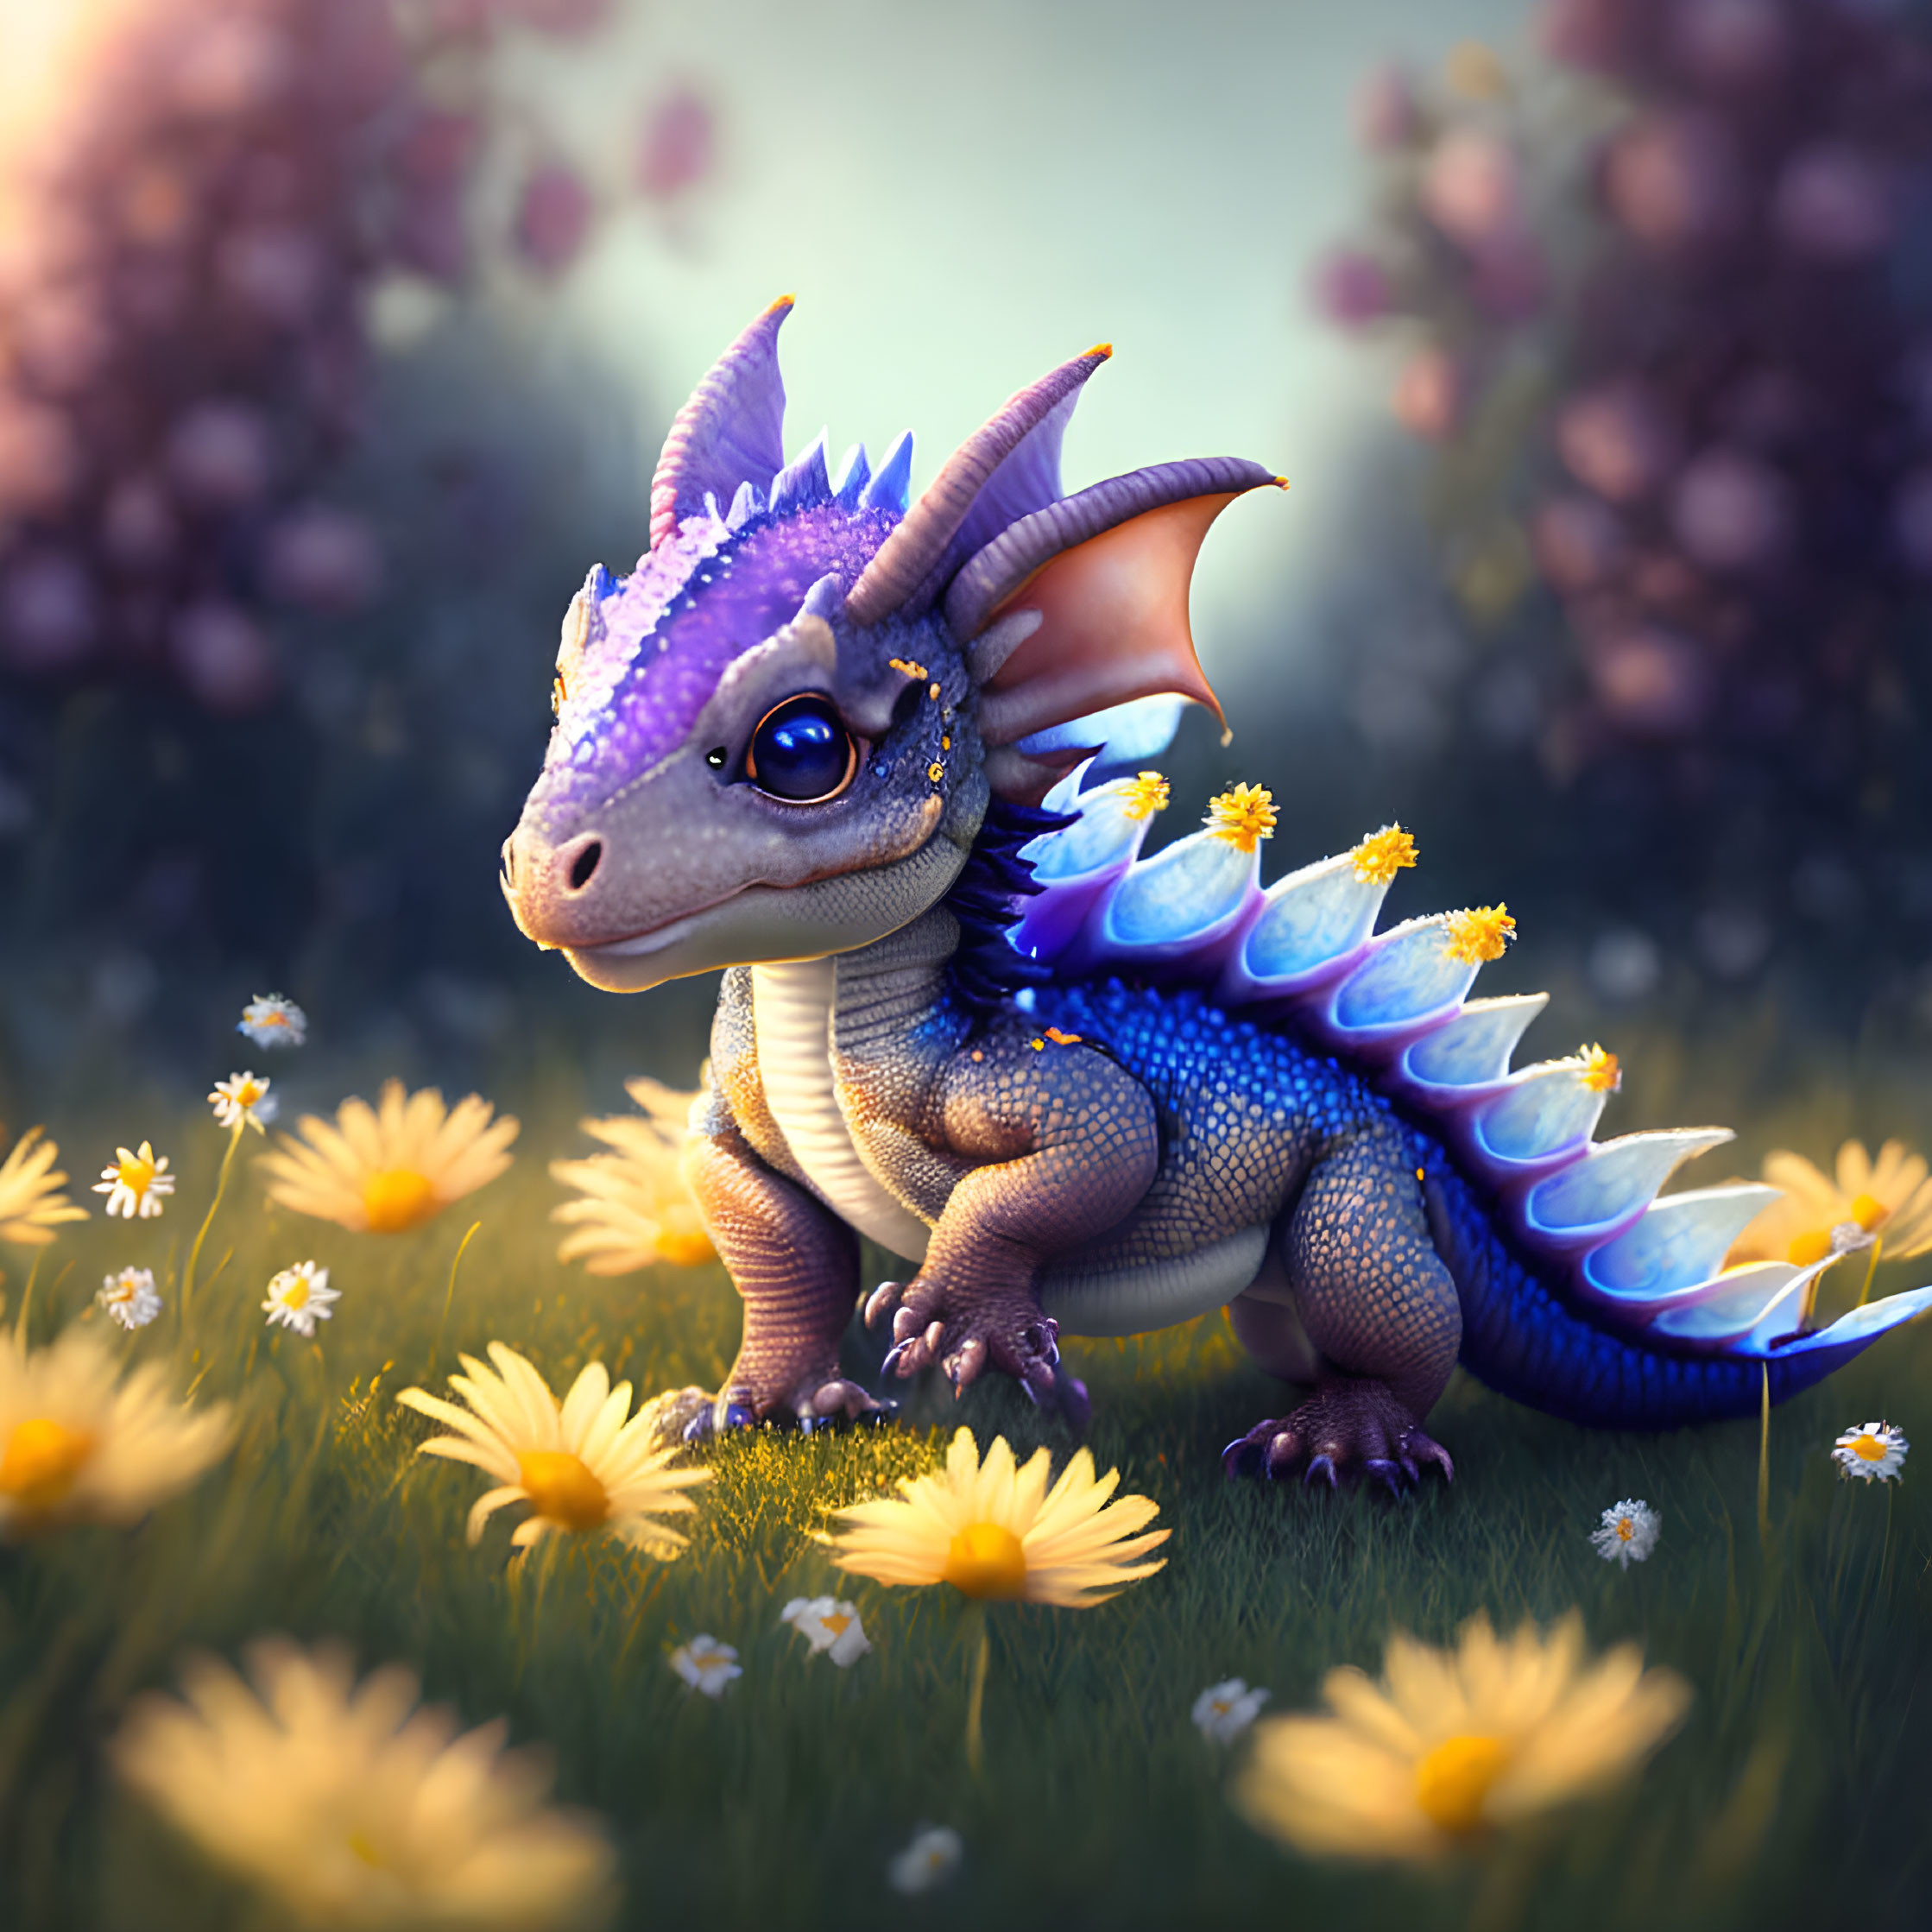 Colorful Dragon Among Daisies in Fairytale Scene